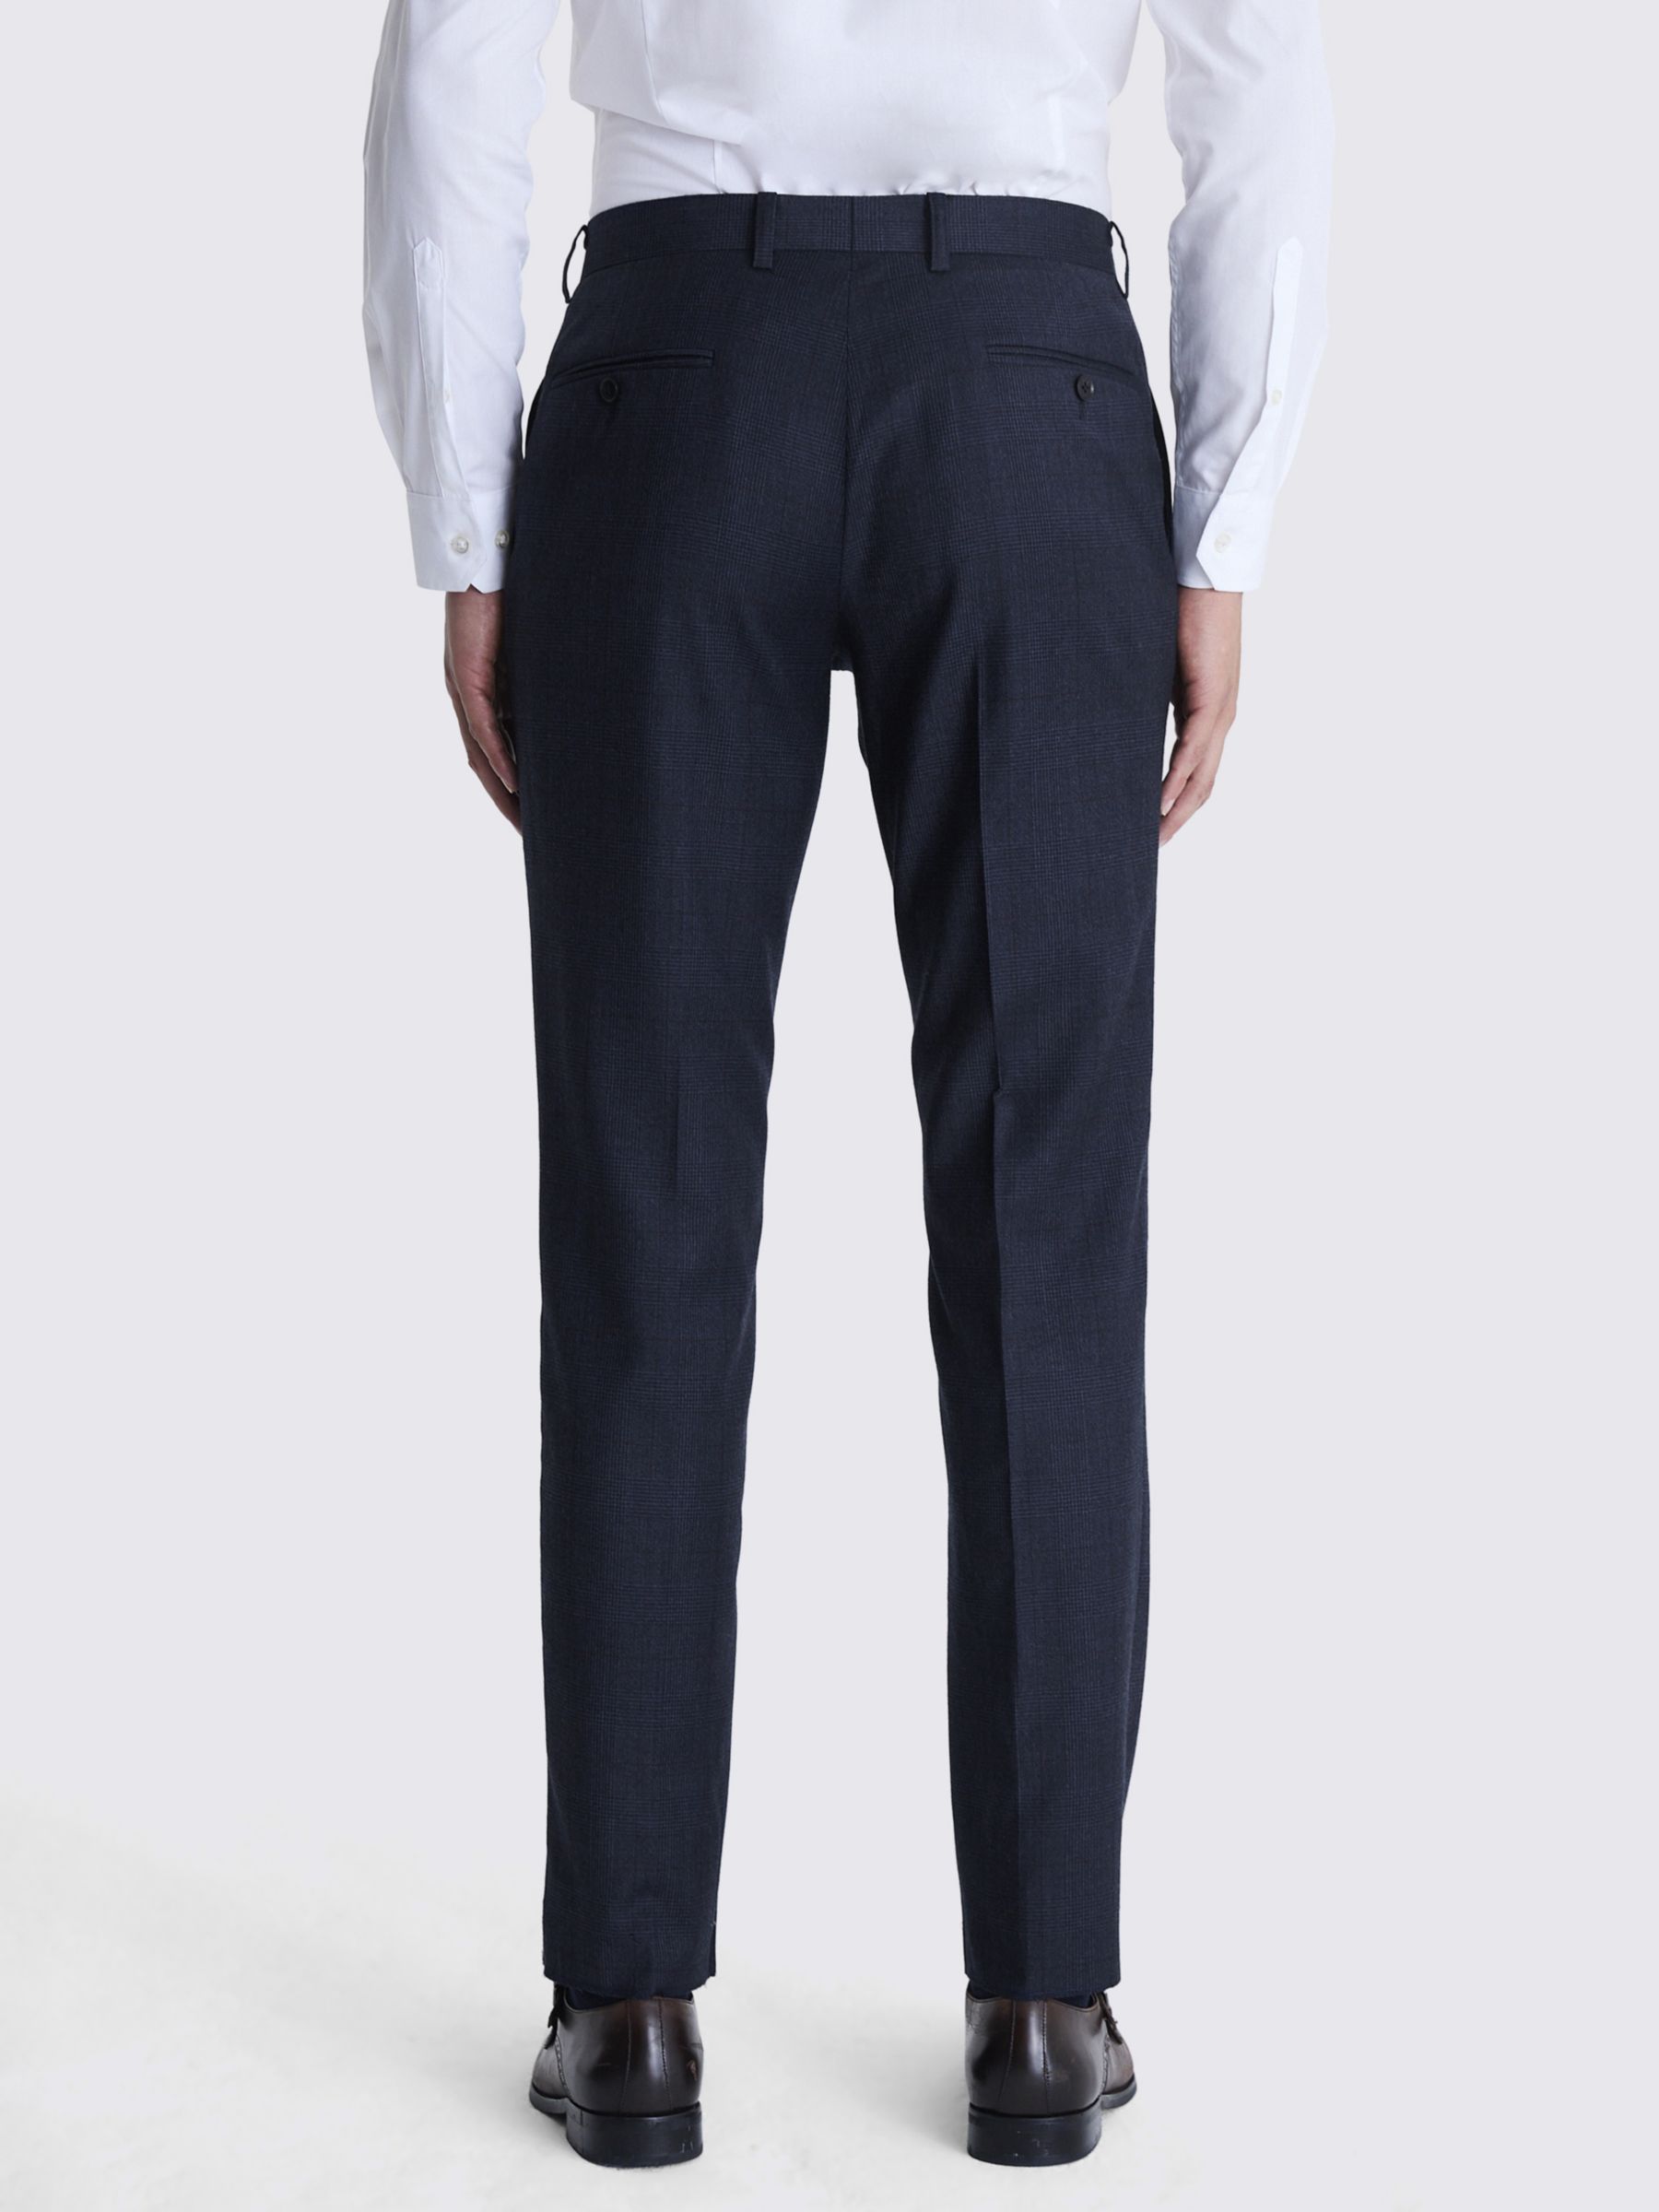 Buy Moss Tailored Fit Wool Blend Check Performance Suit Trousers, Navy Online at johnlewis.com